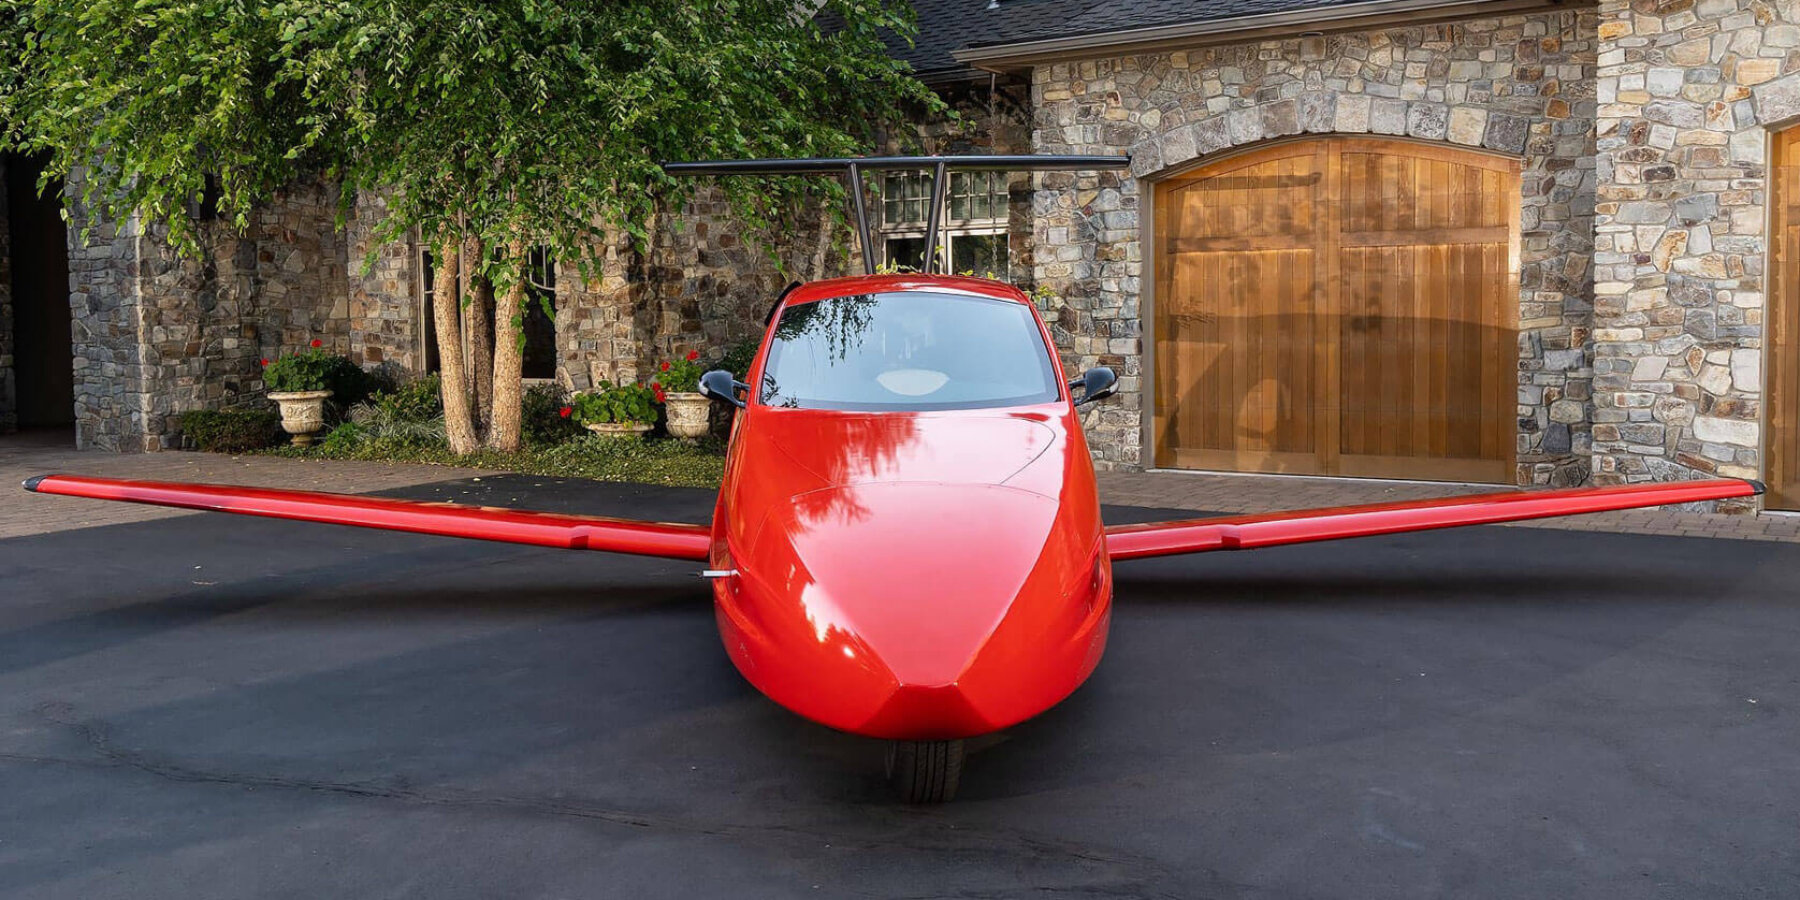 flying car 'switchblade' transforms from road-legal vehicle to aircraft in  under 3 minutes